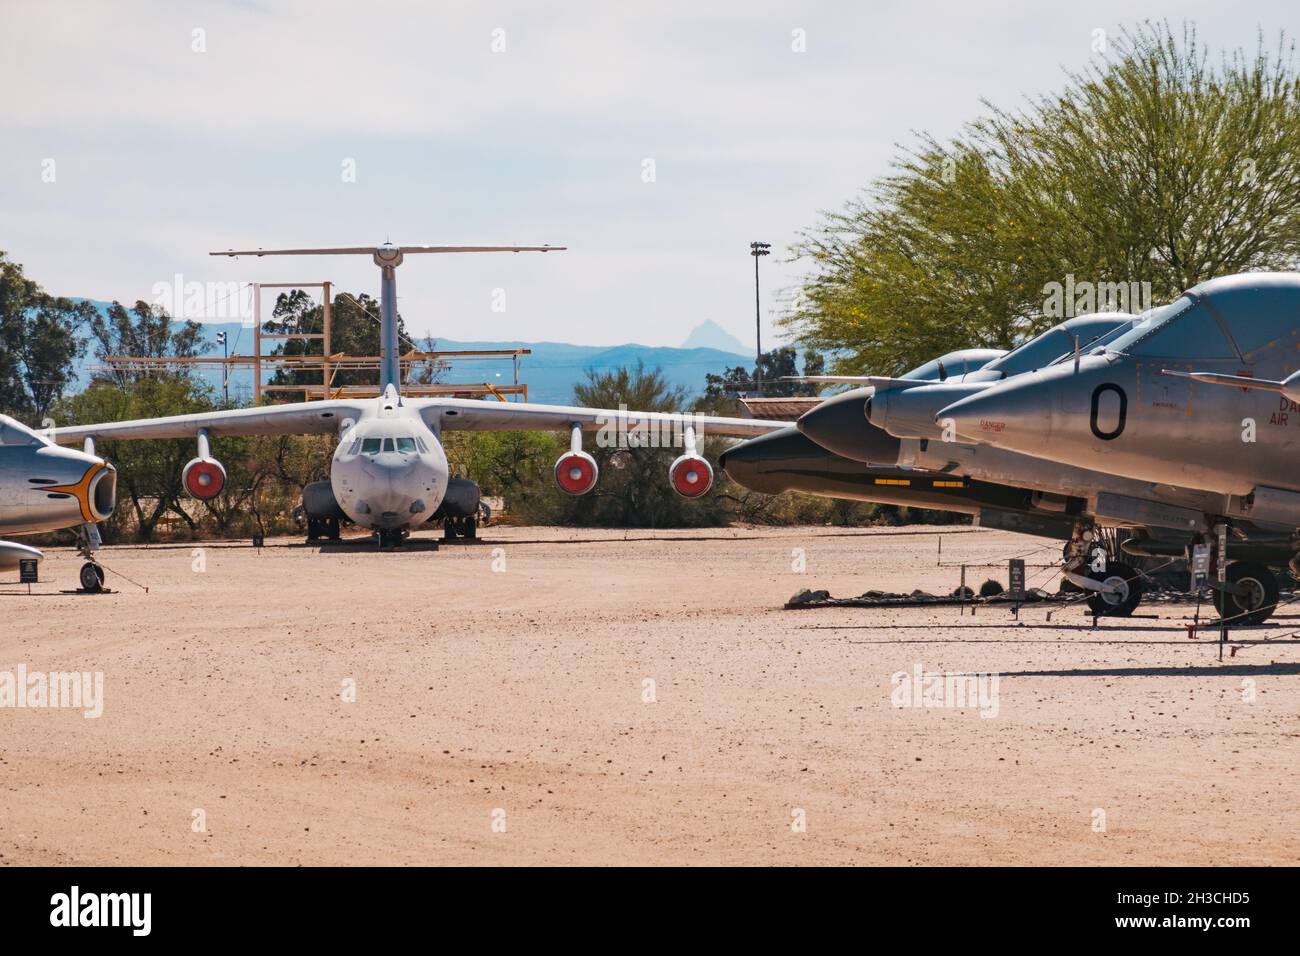 A C-141 Starlifter sits at the Pima Air & Space Museum, Tucson, AZ Stock Photo